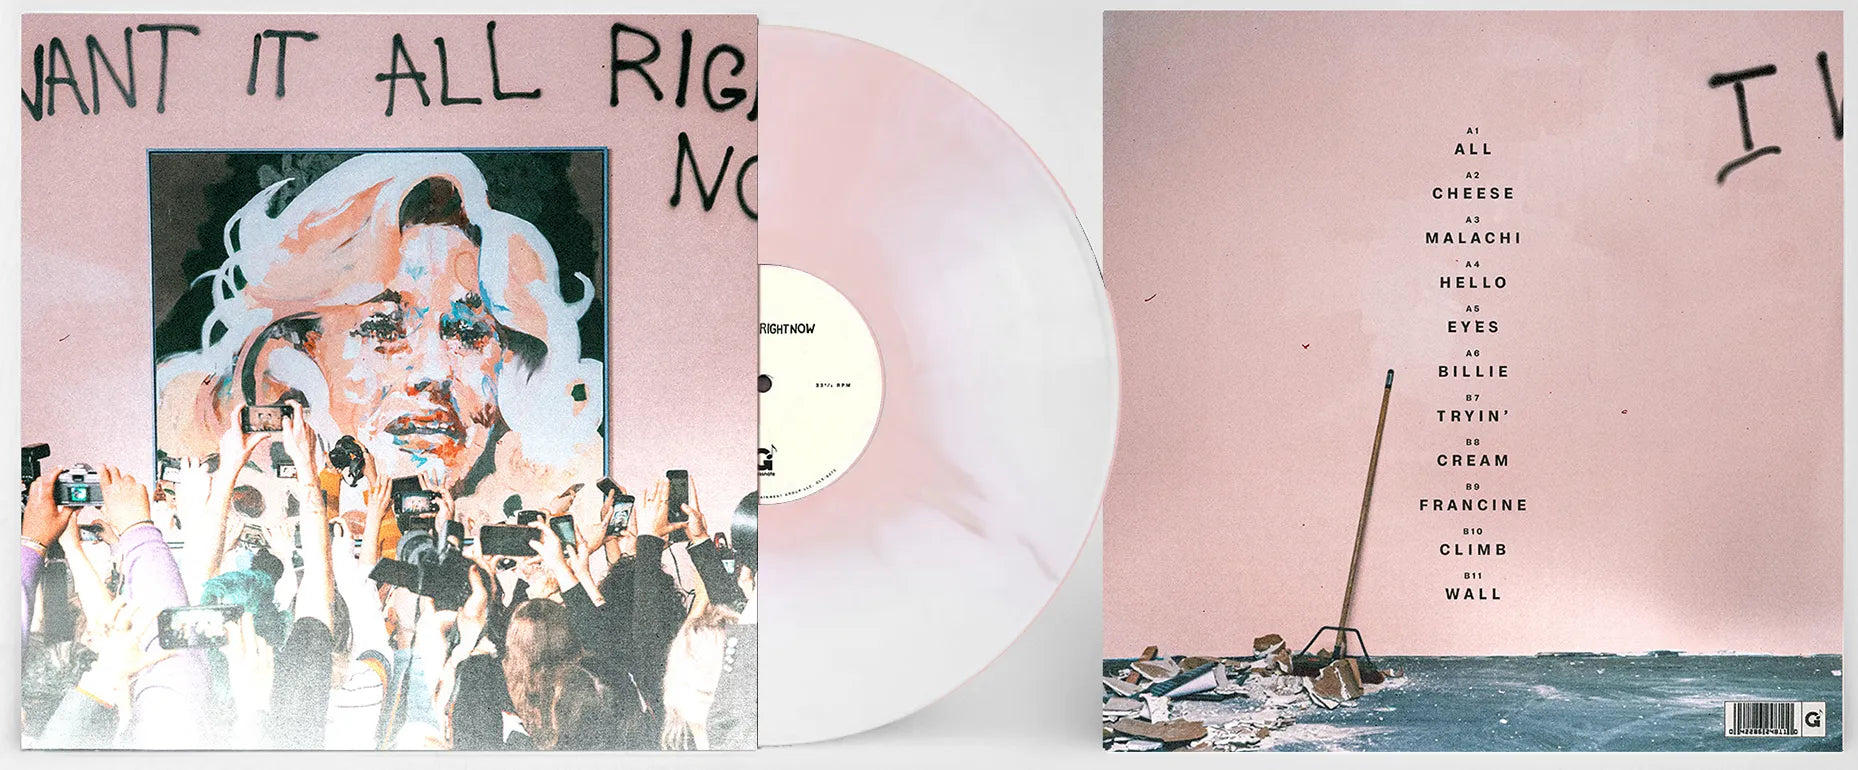 TELL ME THAT IT'S OVER' (EXCLUSIVE LIMITED WHITE VINYL)